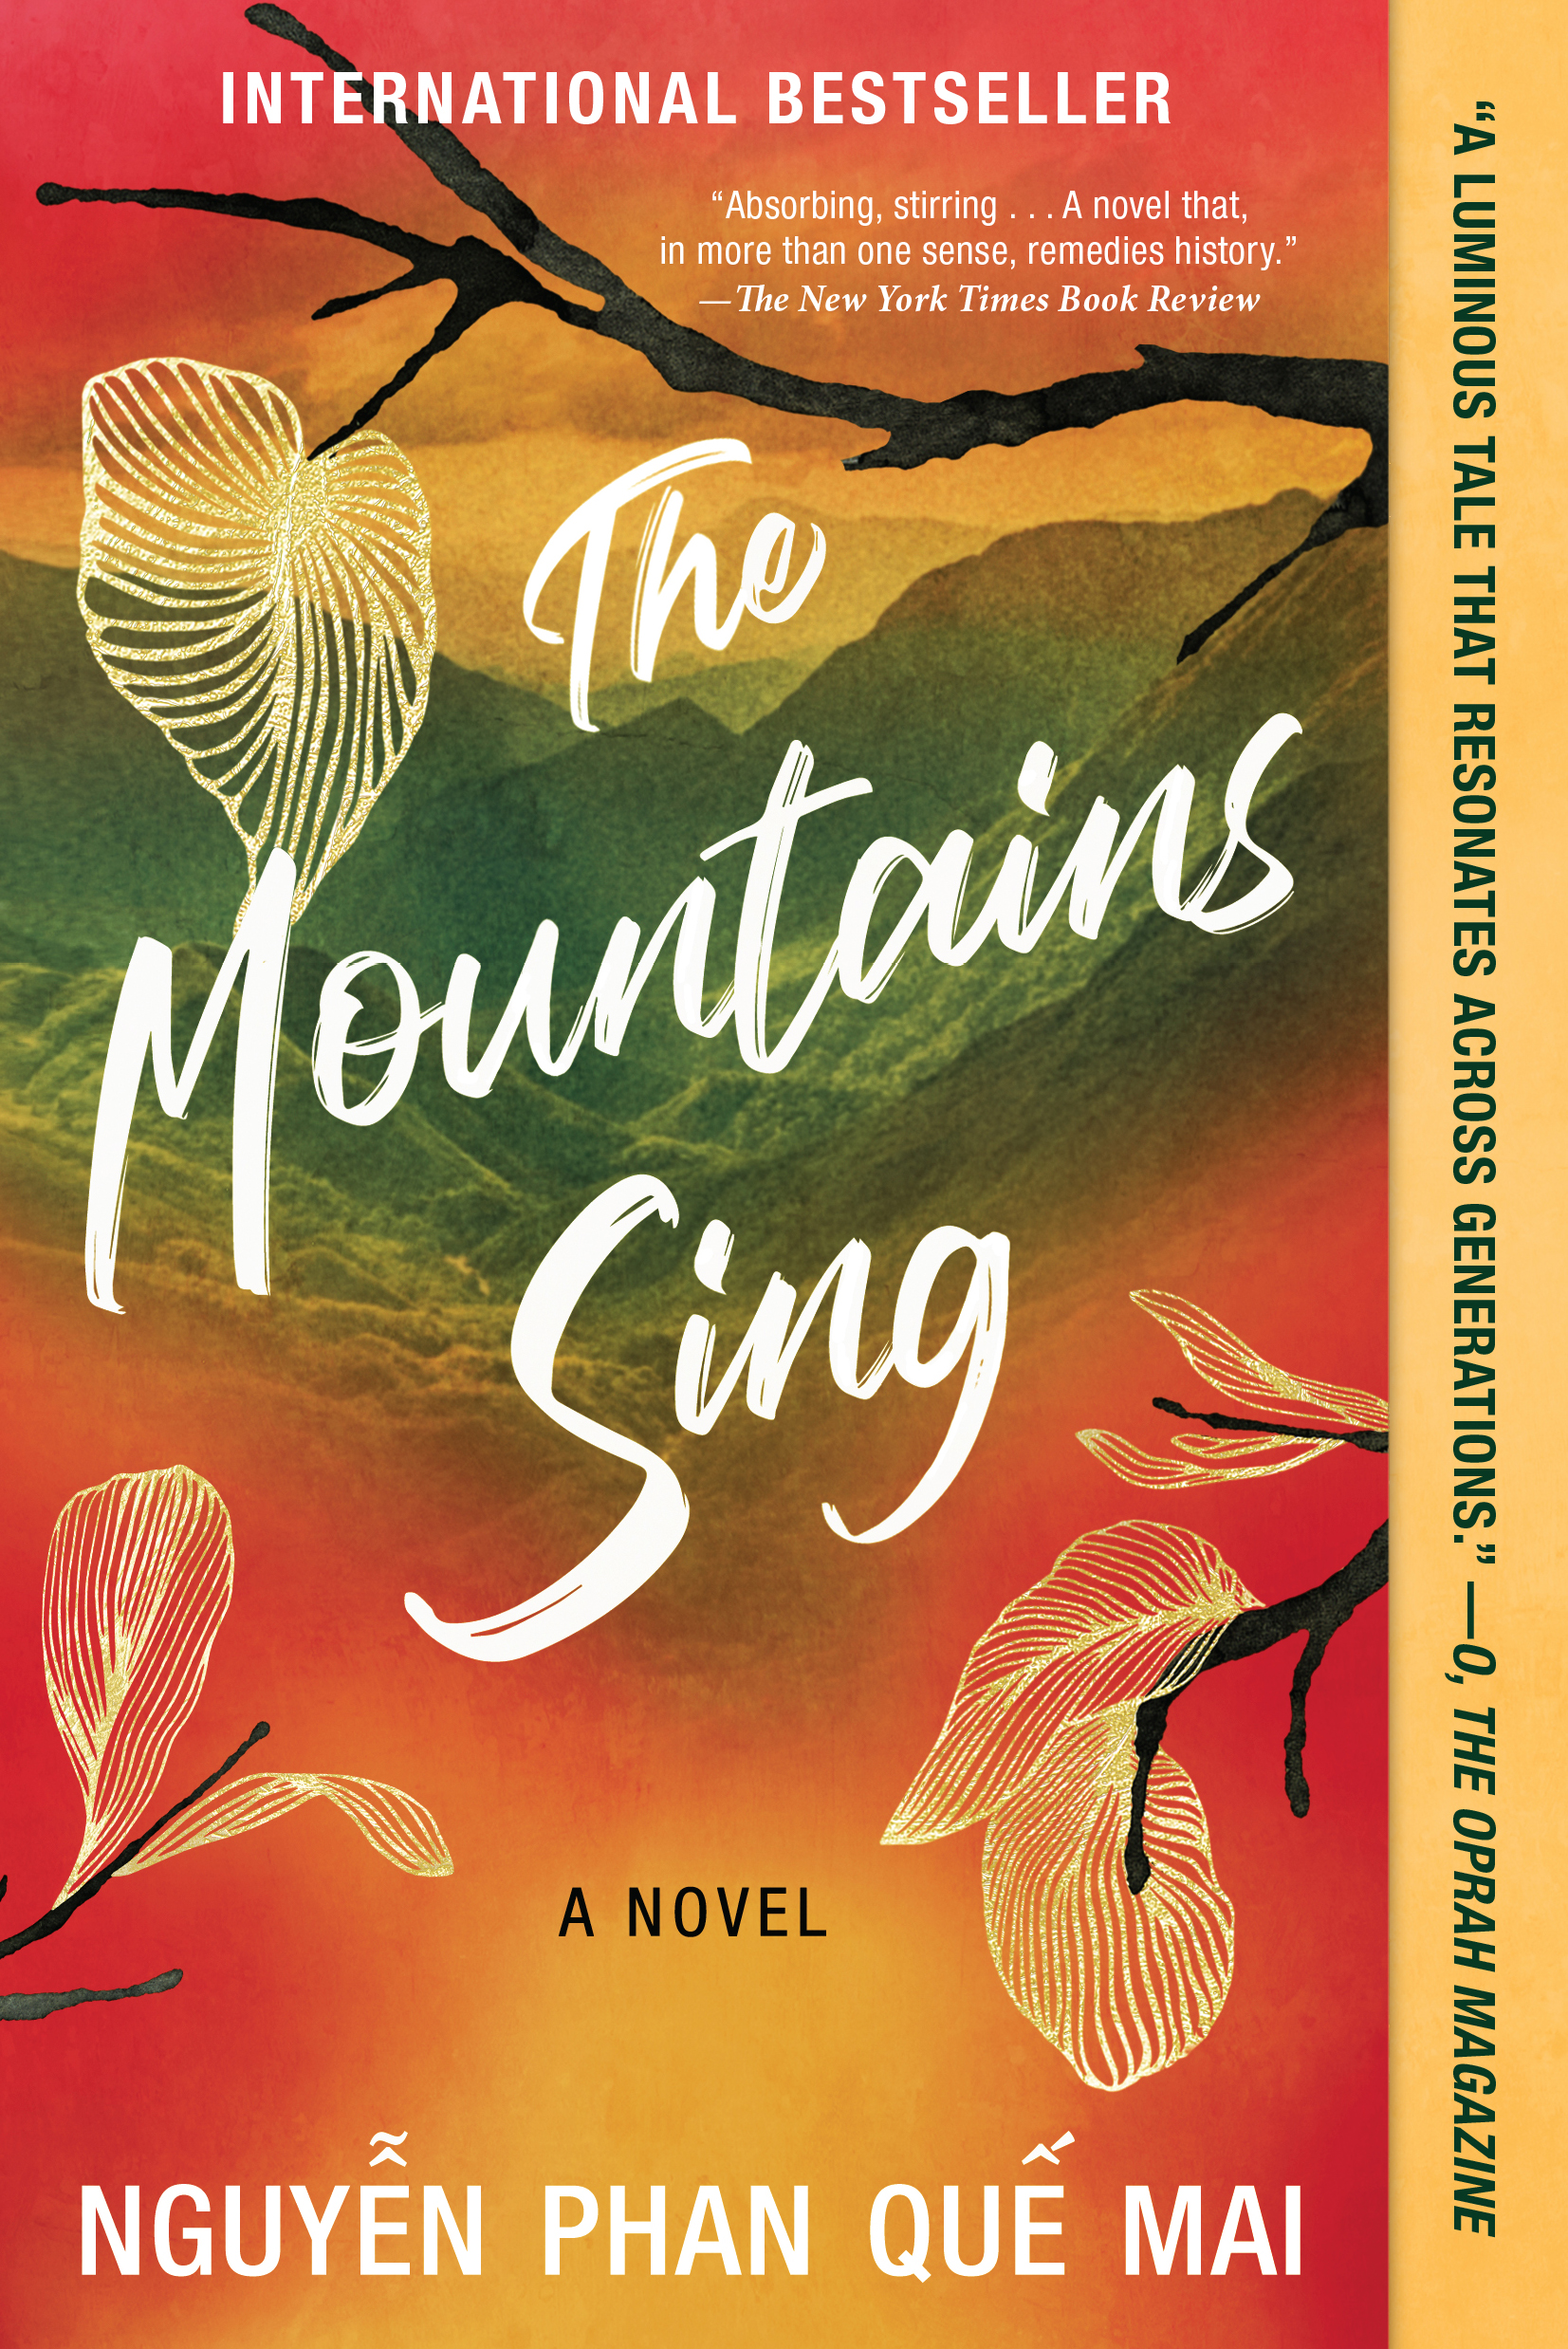 Quế　Mai　Book　Hachette　Mountains　Phan　Sing　Nguyễn　by　The　Group